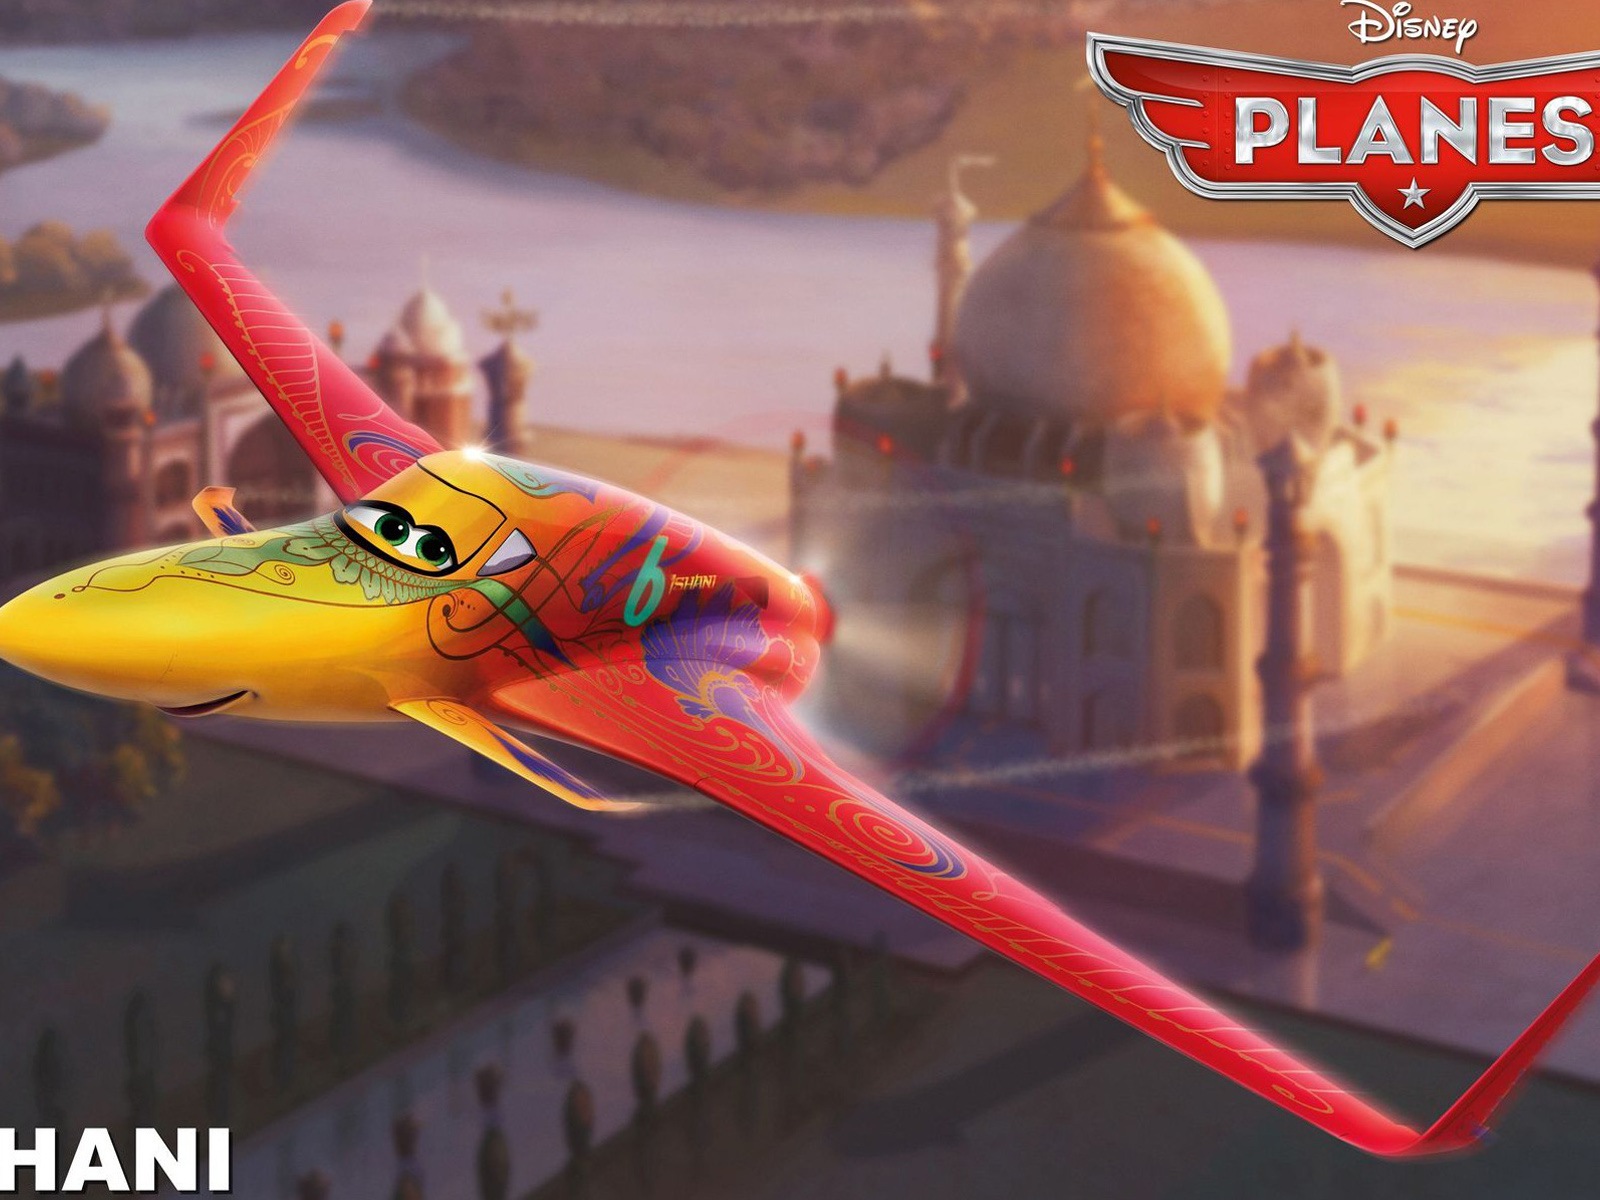 Planes 2013 HD wallpapers #1 - 1600x1200